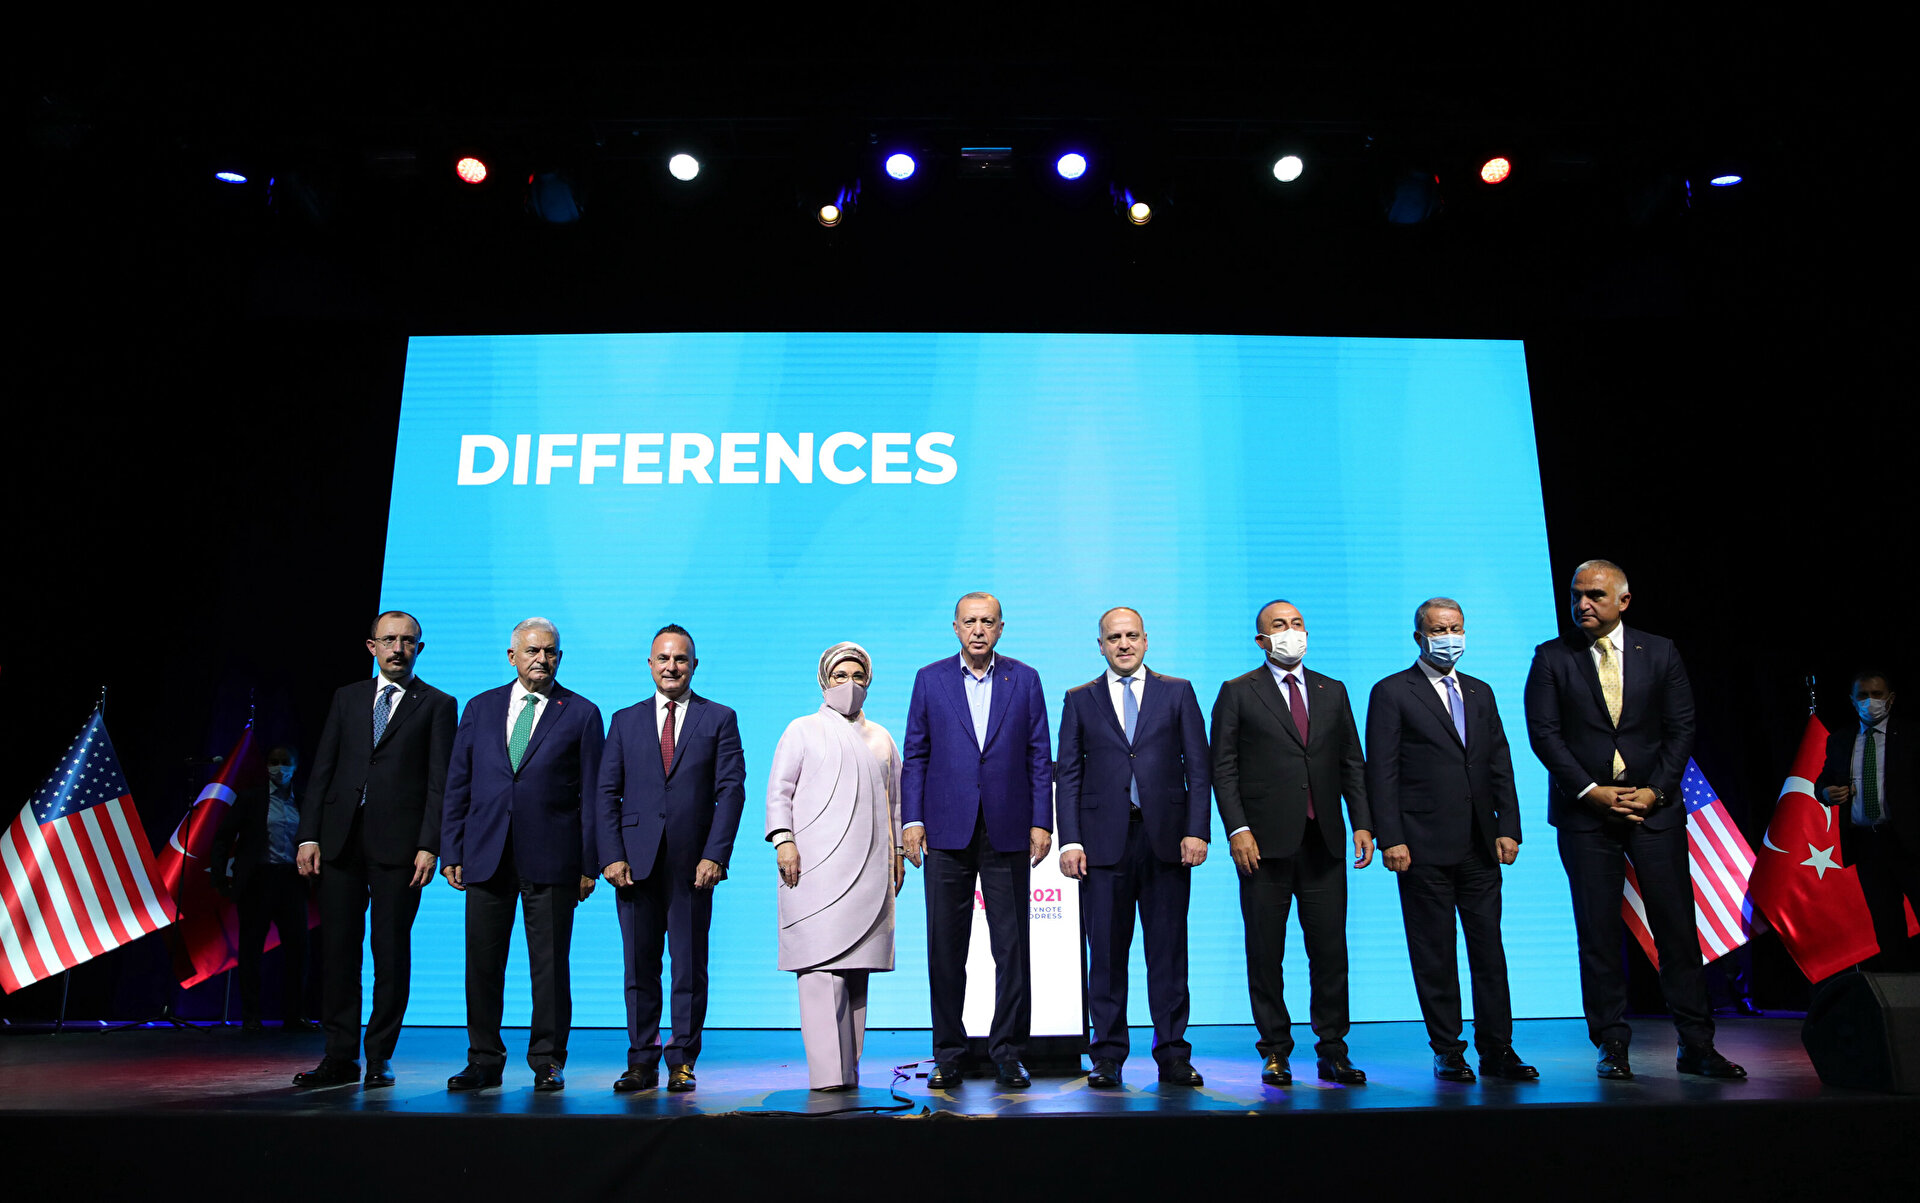 Erdoğan attends 'A Fairer World Is Possible' conference in US